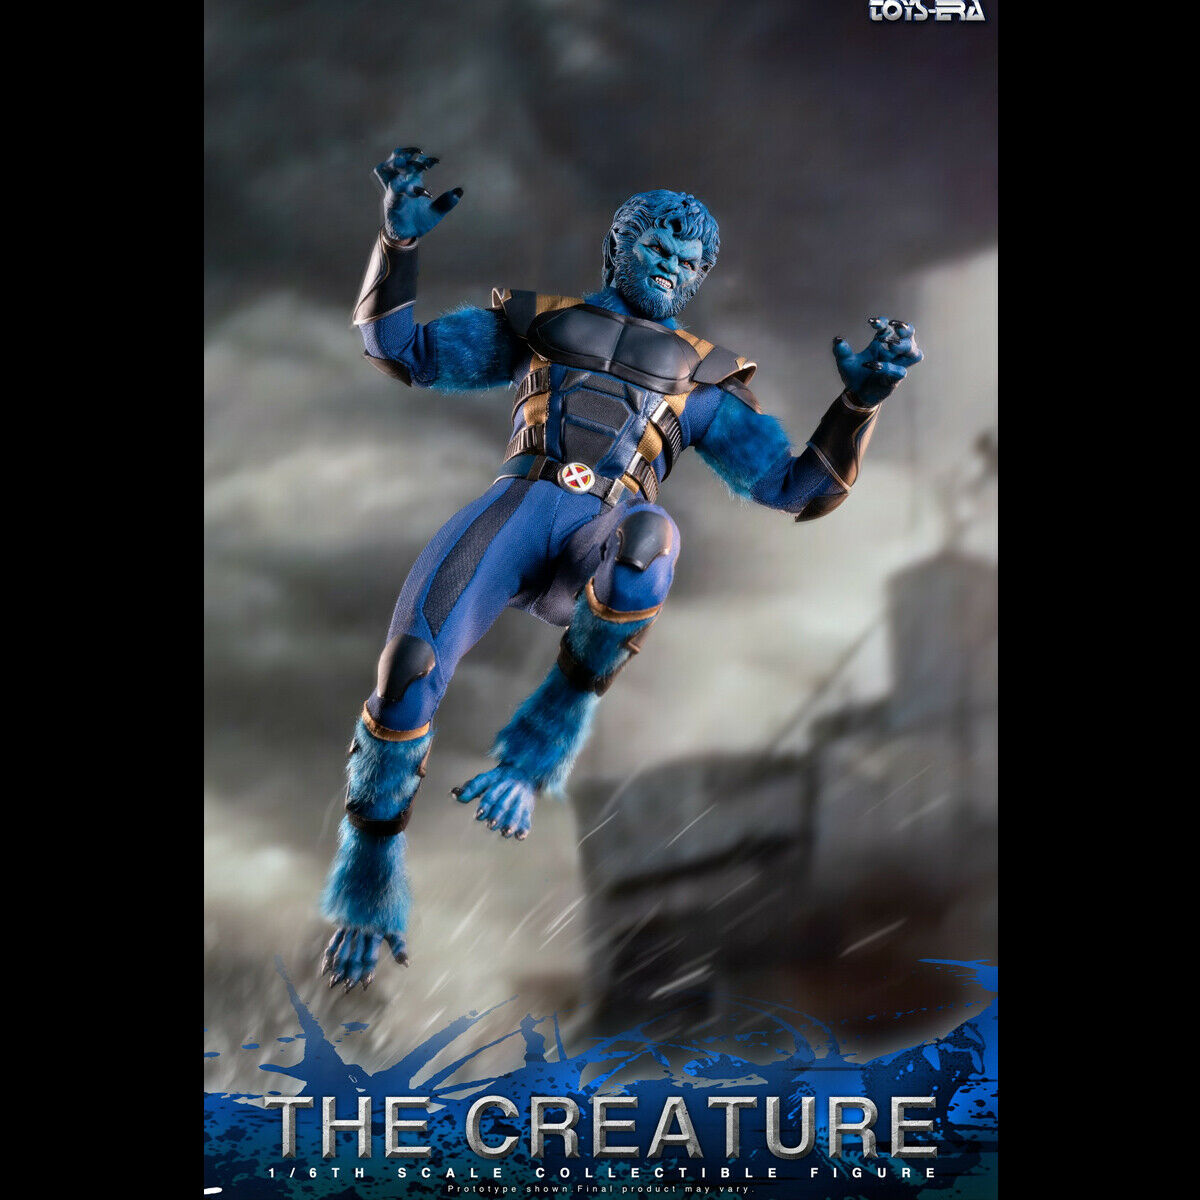 TOYS ERA 1/6 TE029 The ultimate combat suit The Creature  in stock USA now 